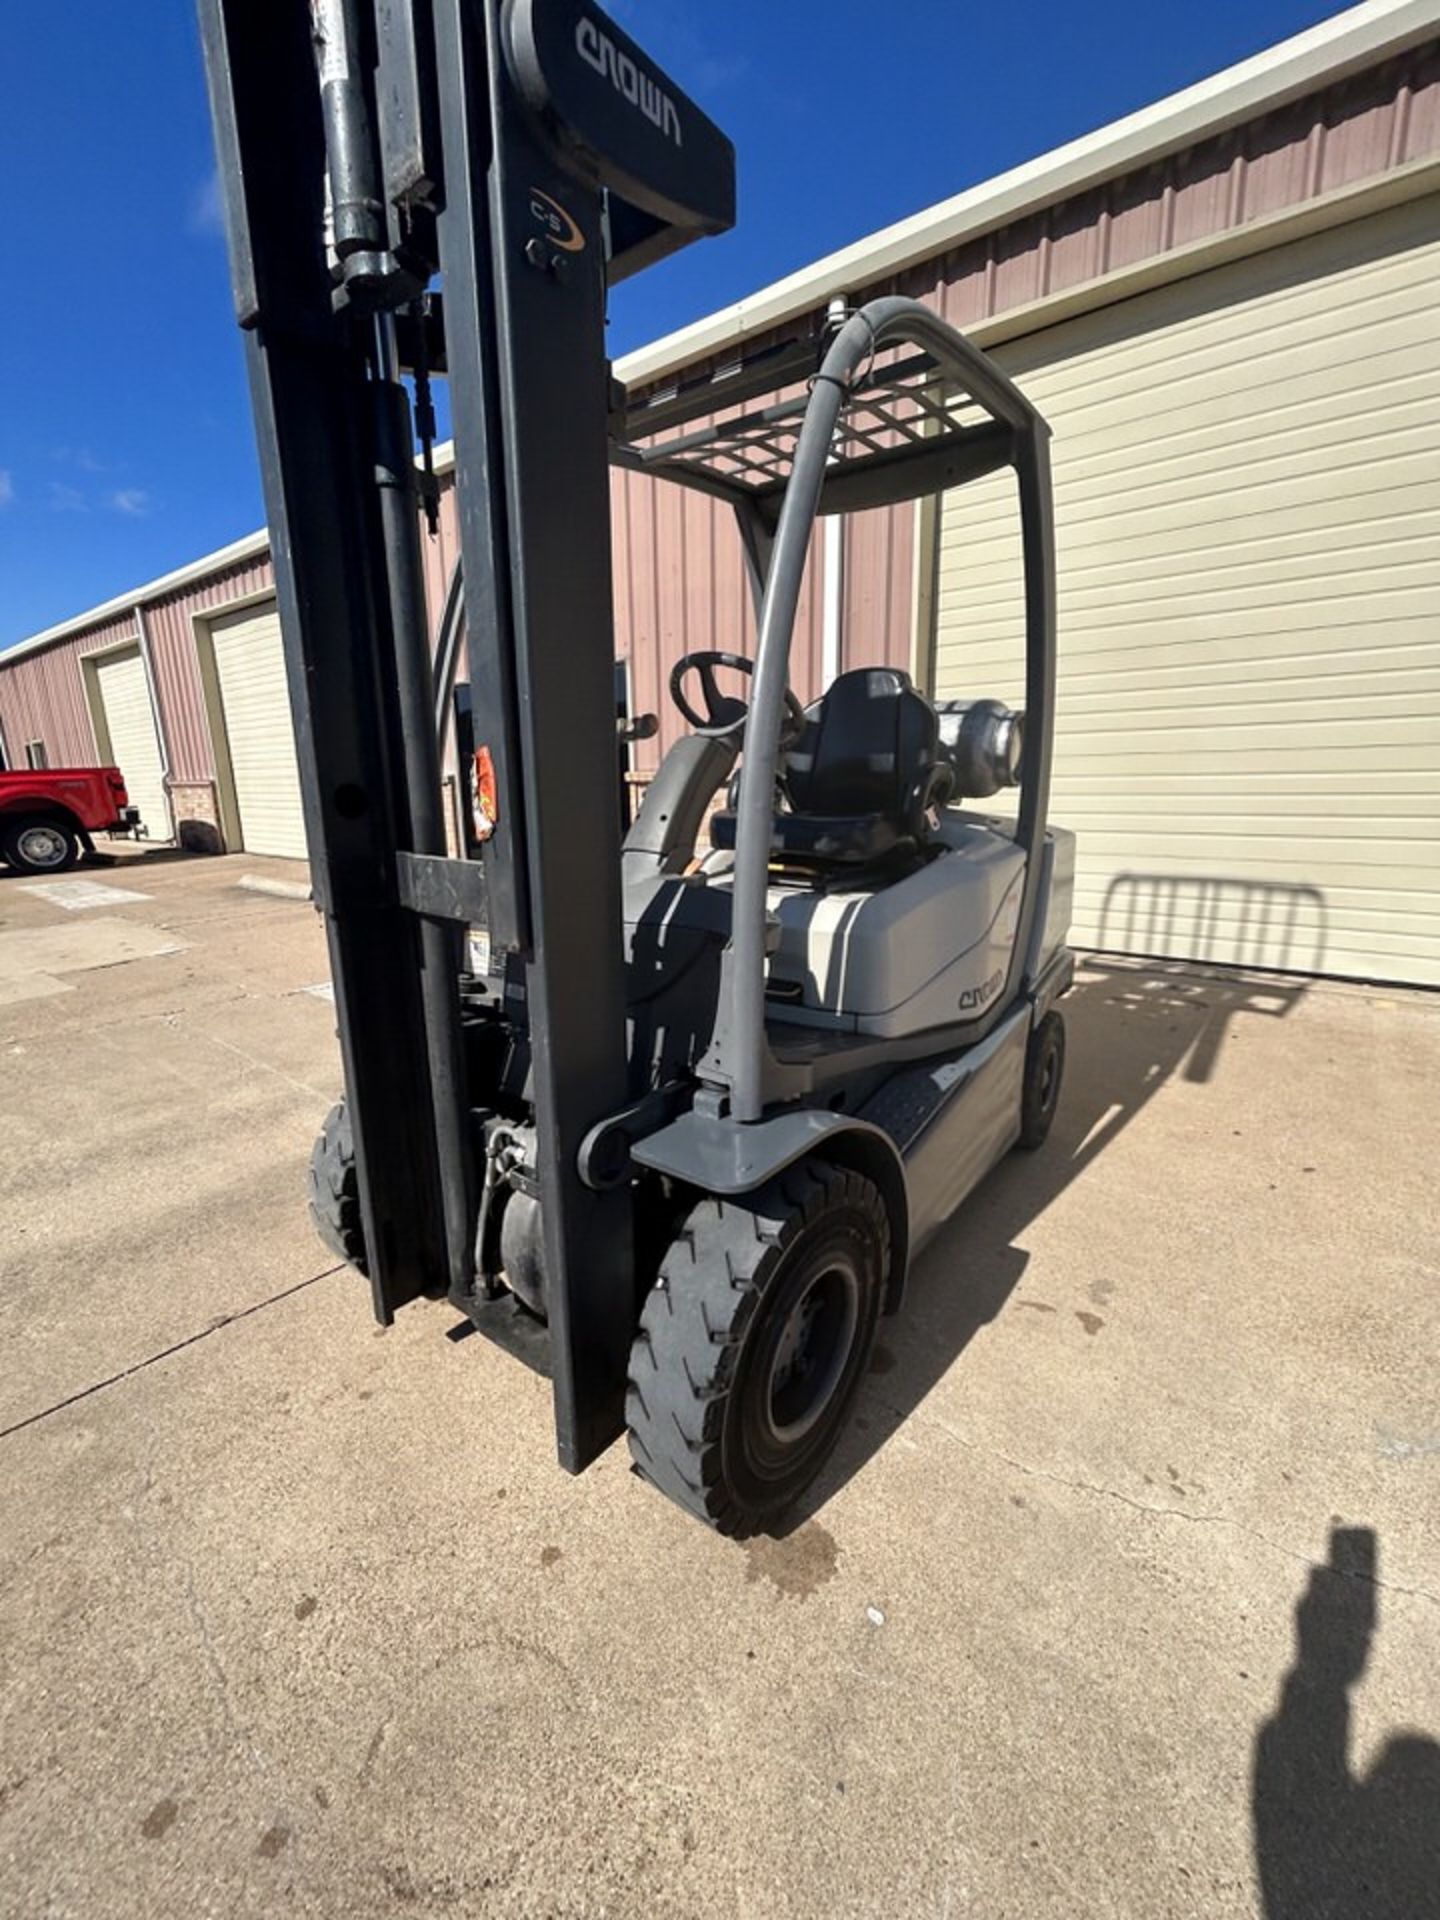 2017 Crown 5,000 lbs Forkift, 3 Stage Mast, Pneumatic Tires, Hours Shown: 576 - Image 5 of 12